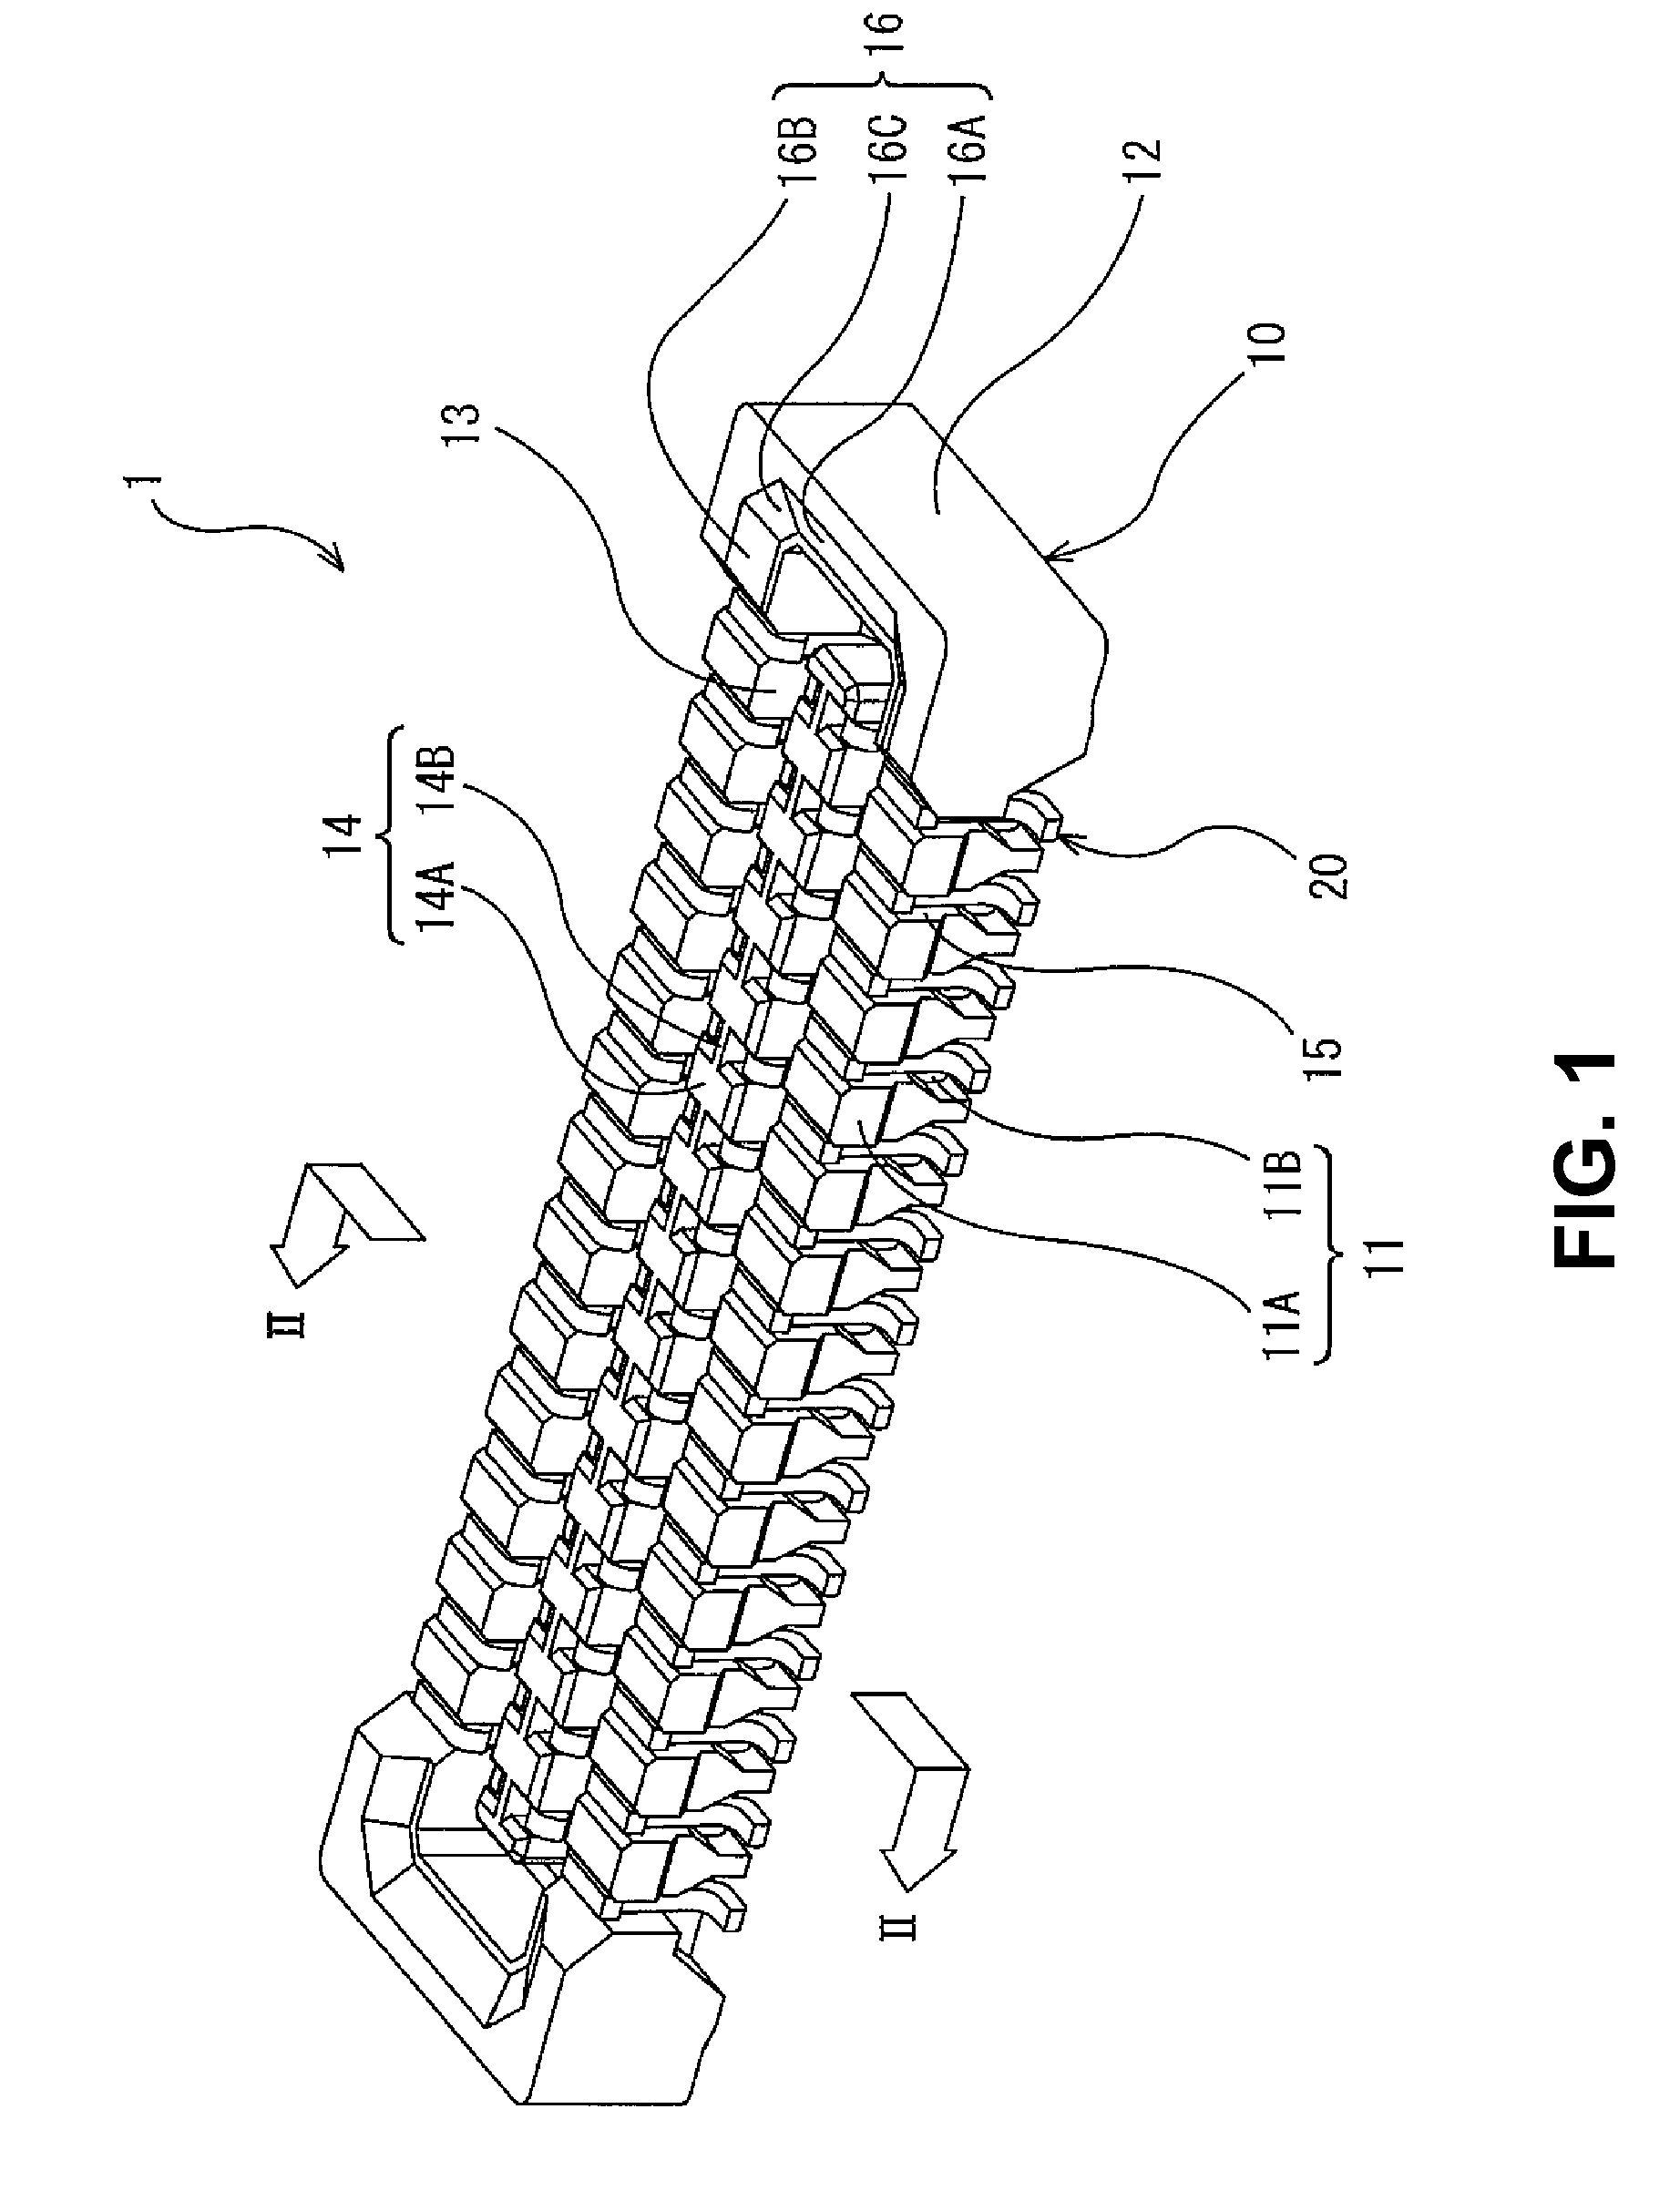 Electrical connector